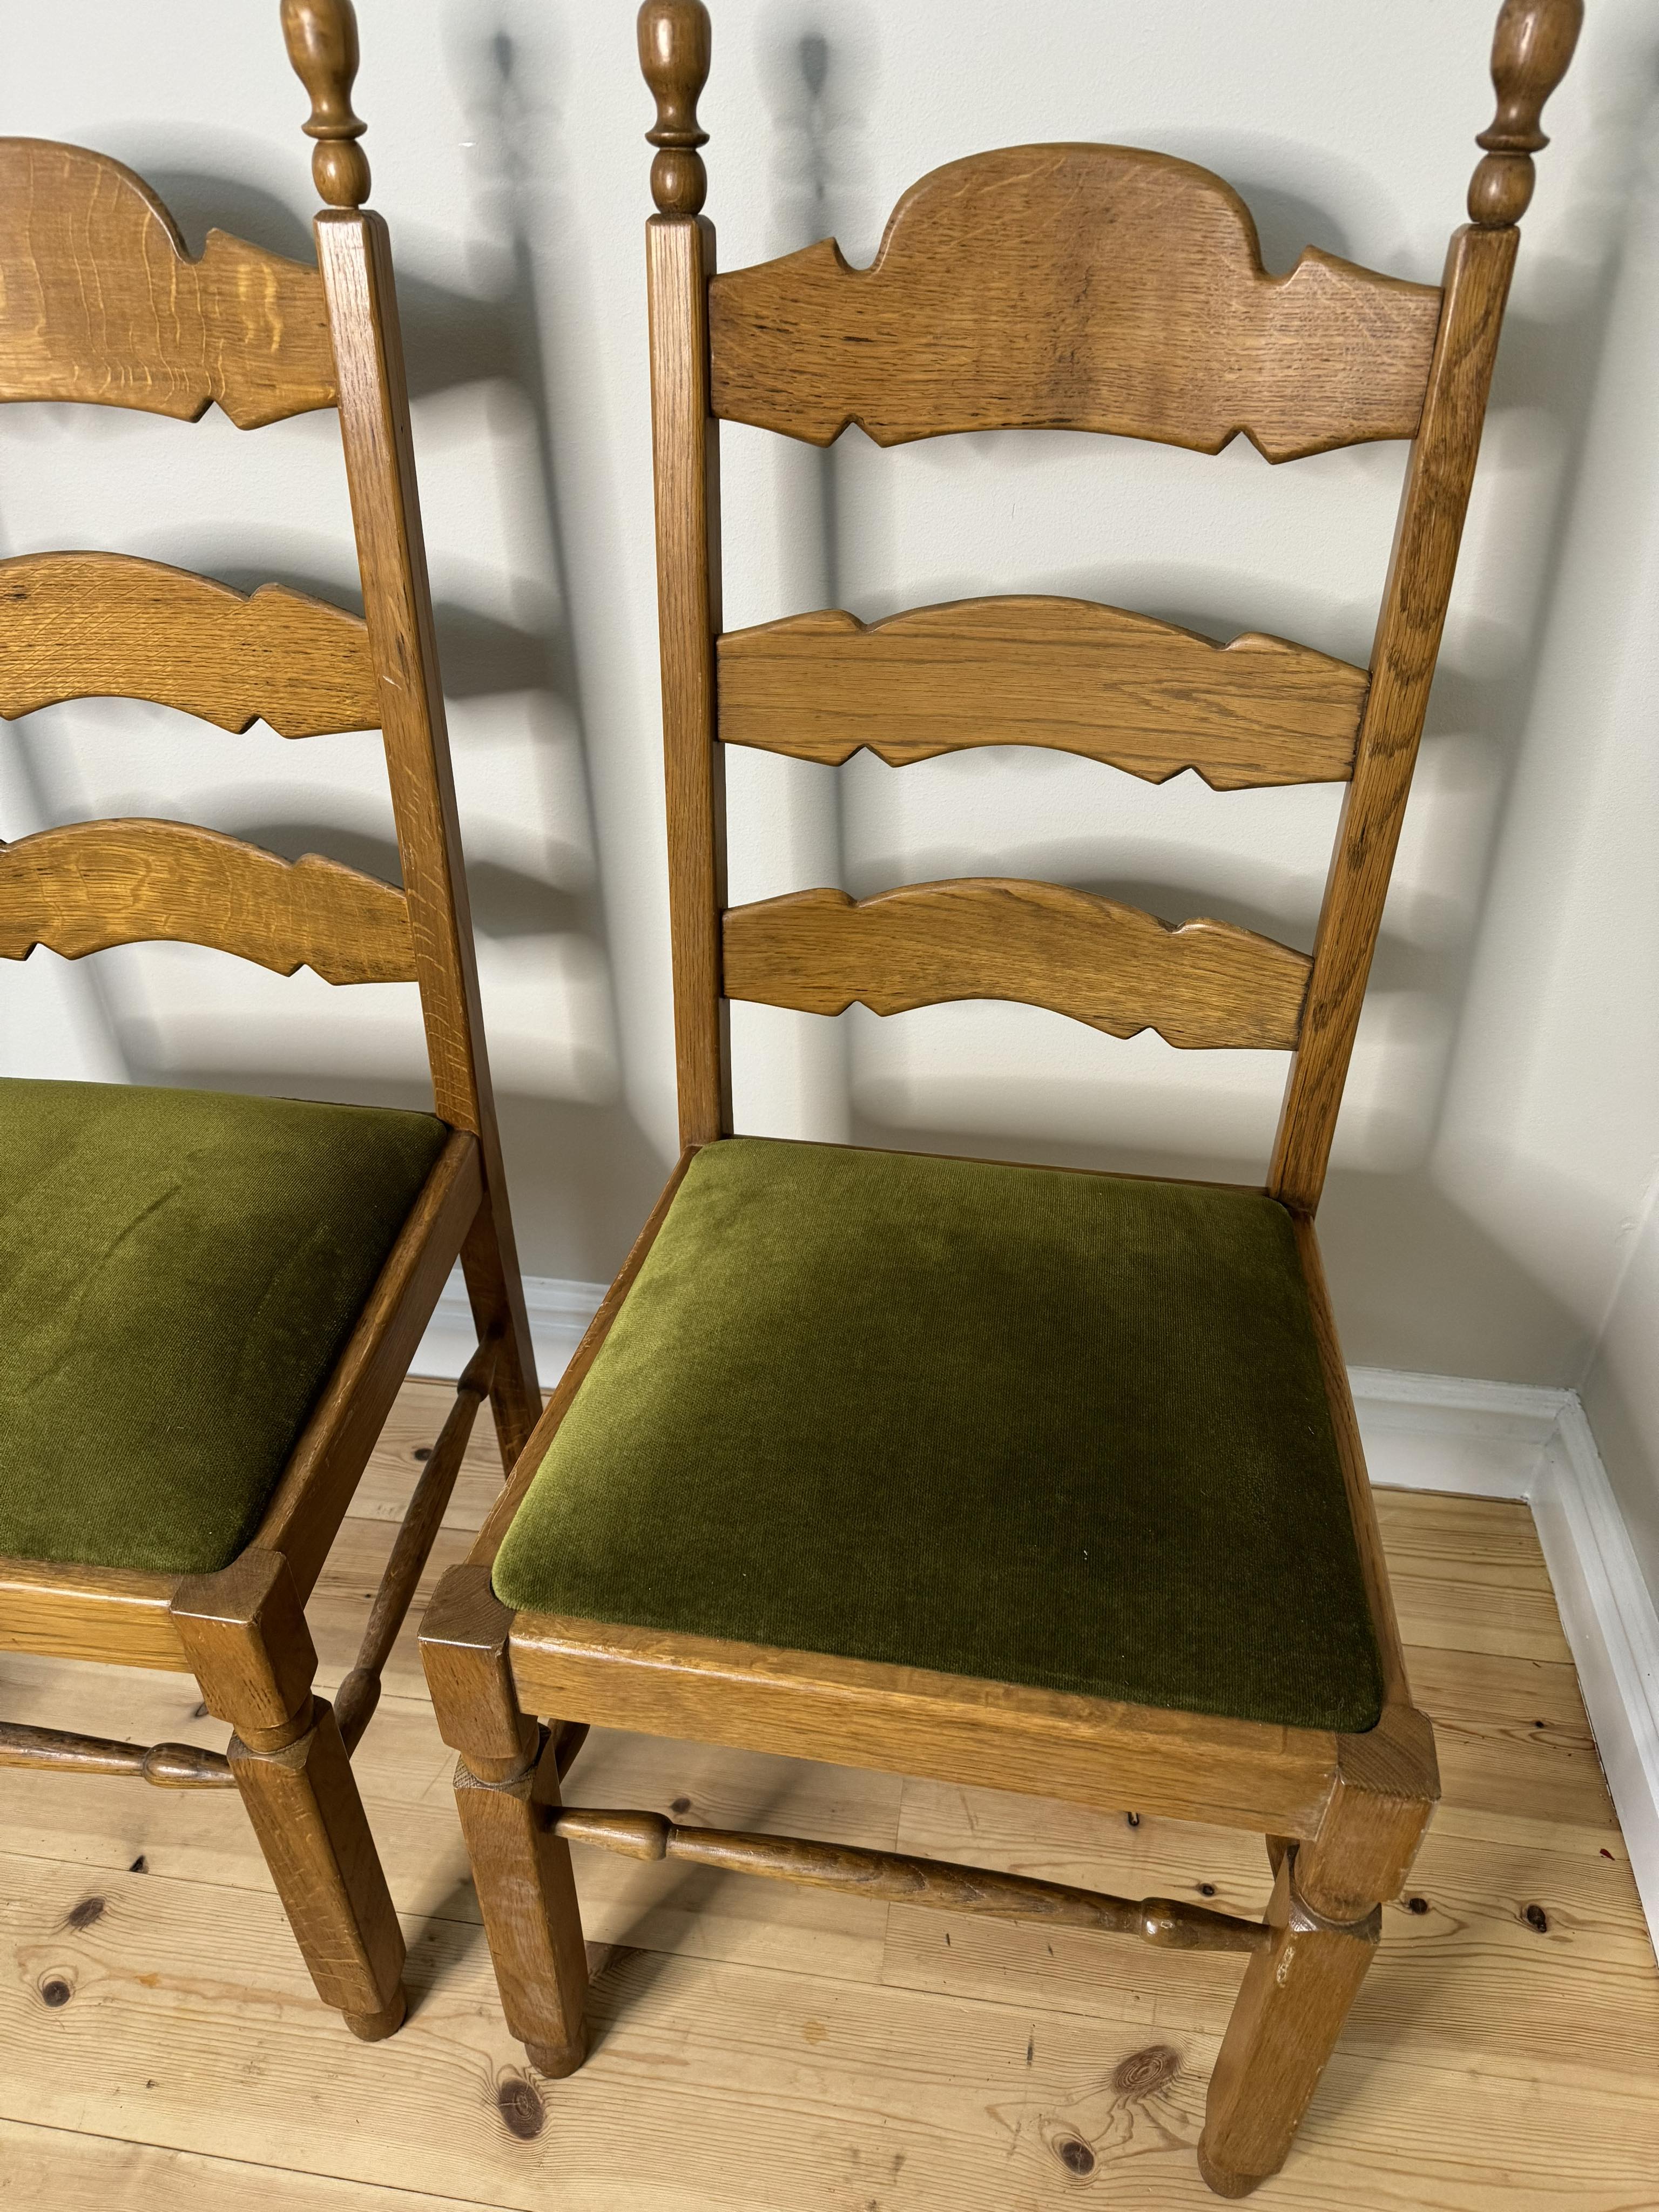 Wooden chairs with green fabric